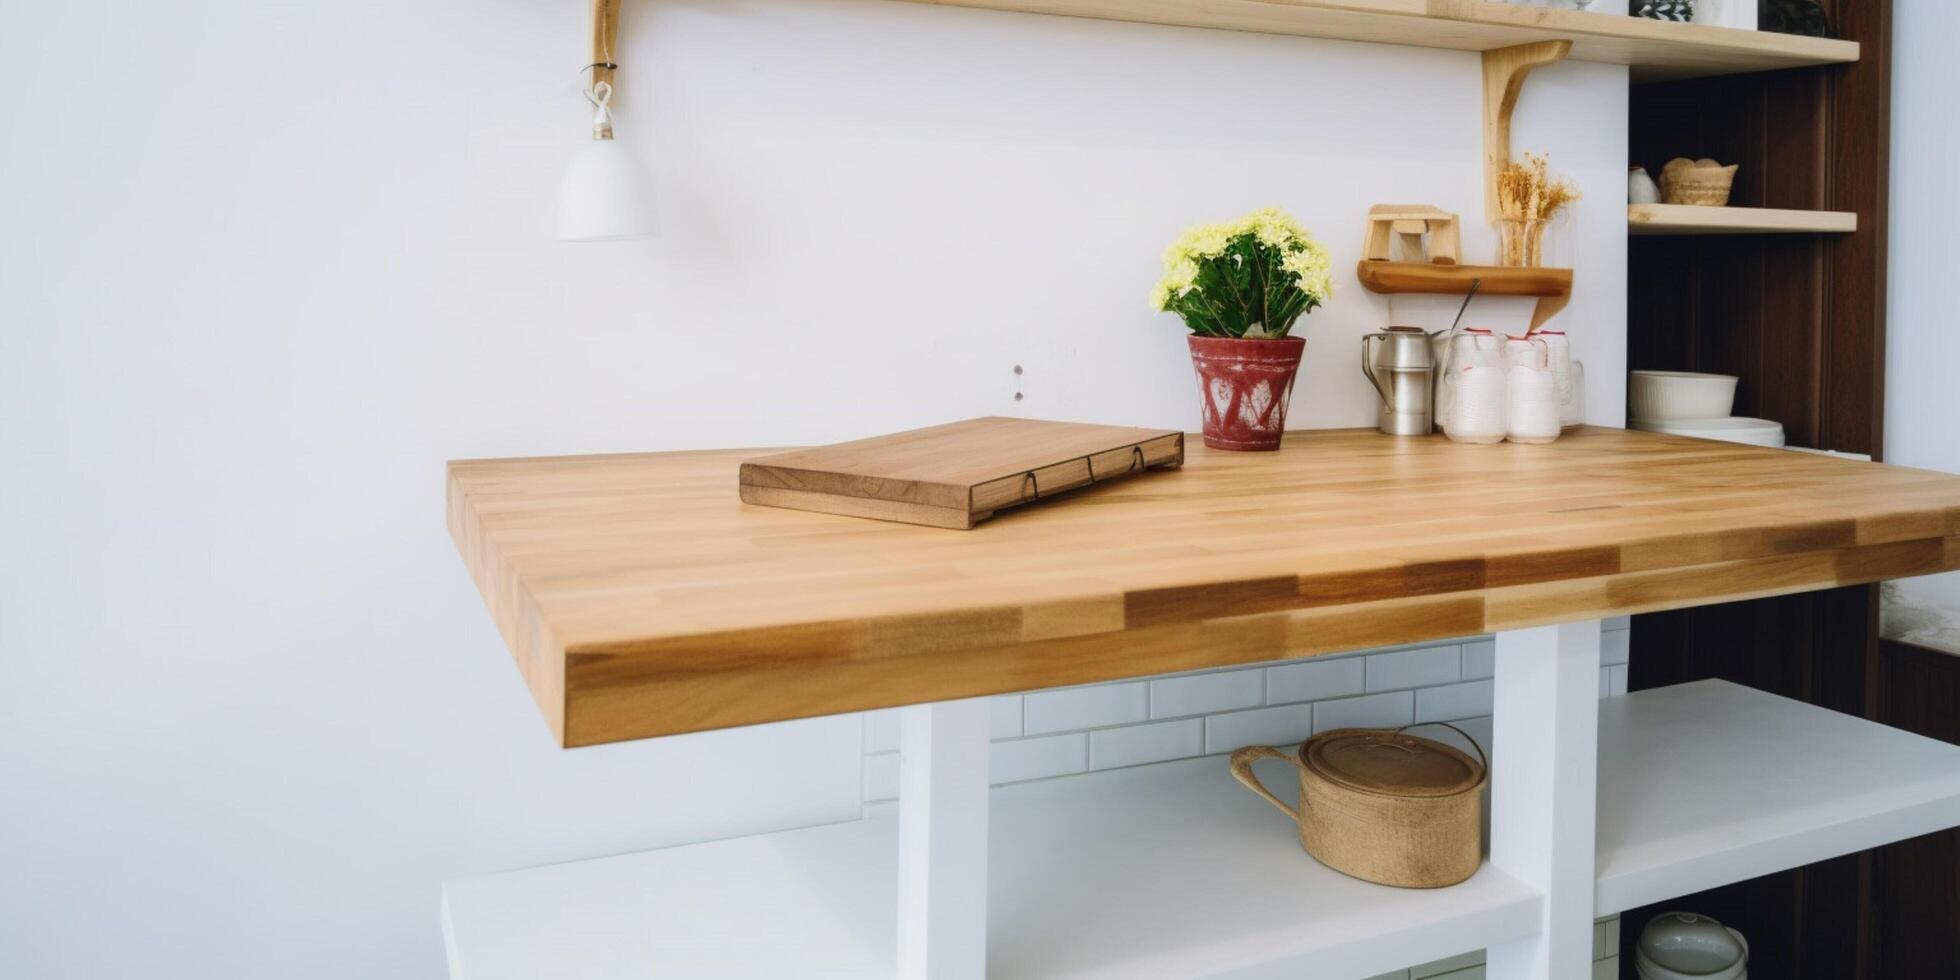 Wooden table in kitchen with shelf background photo